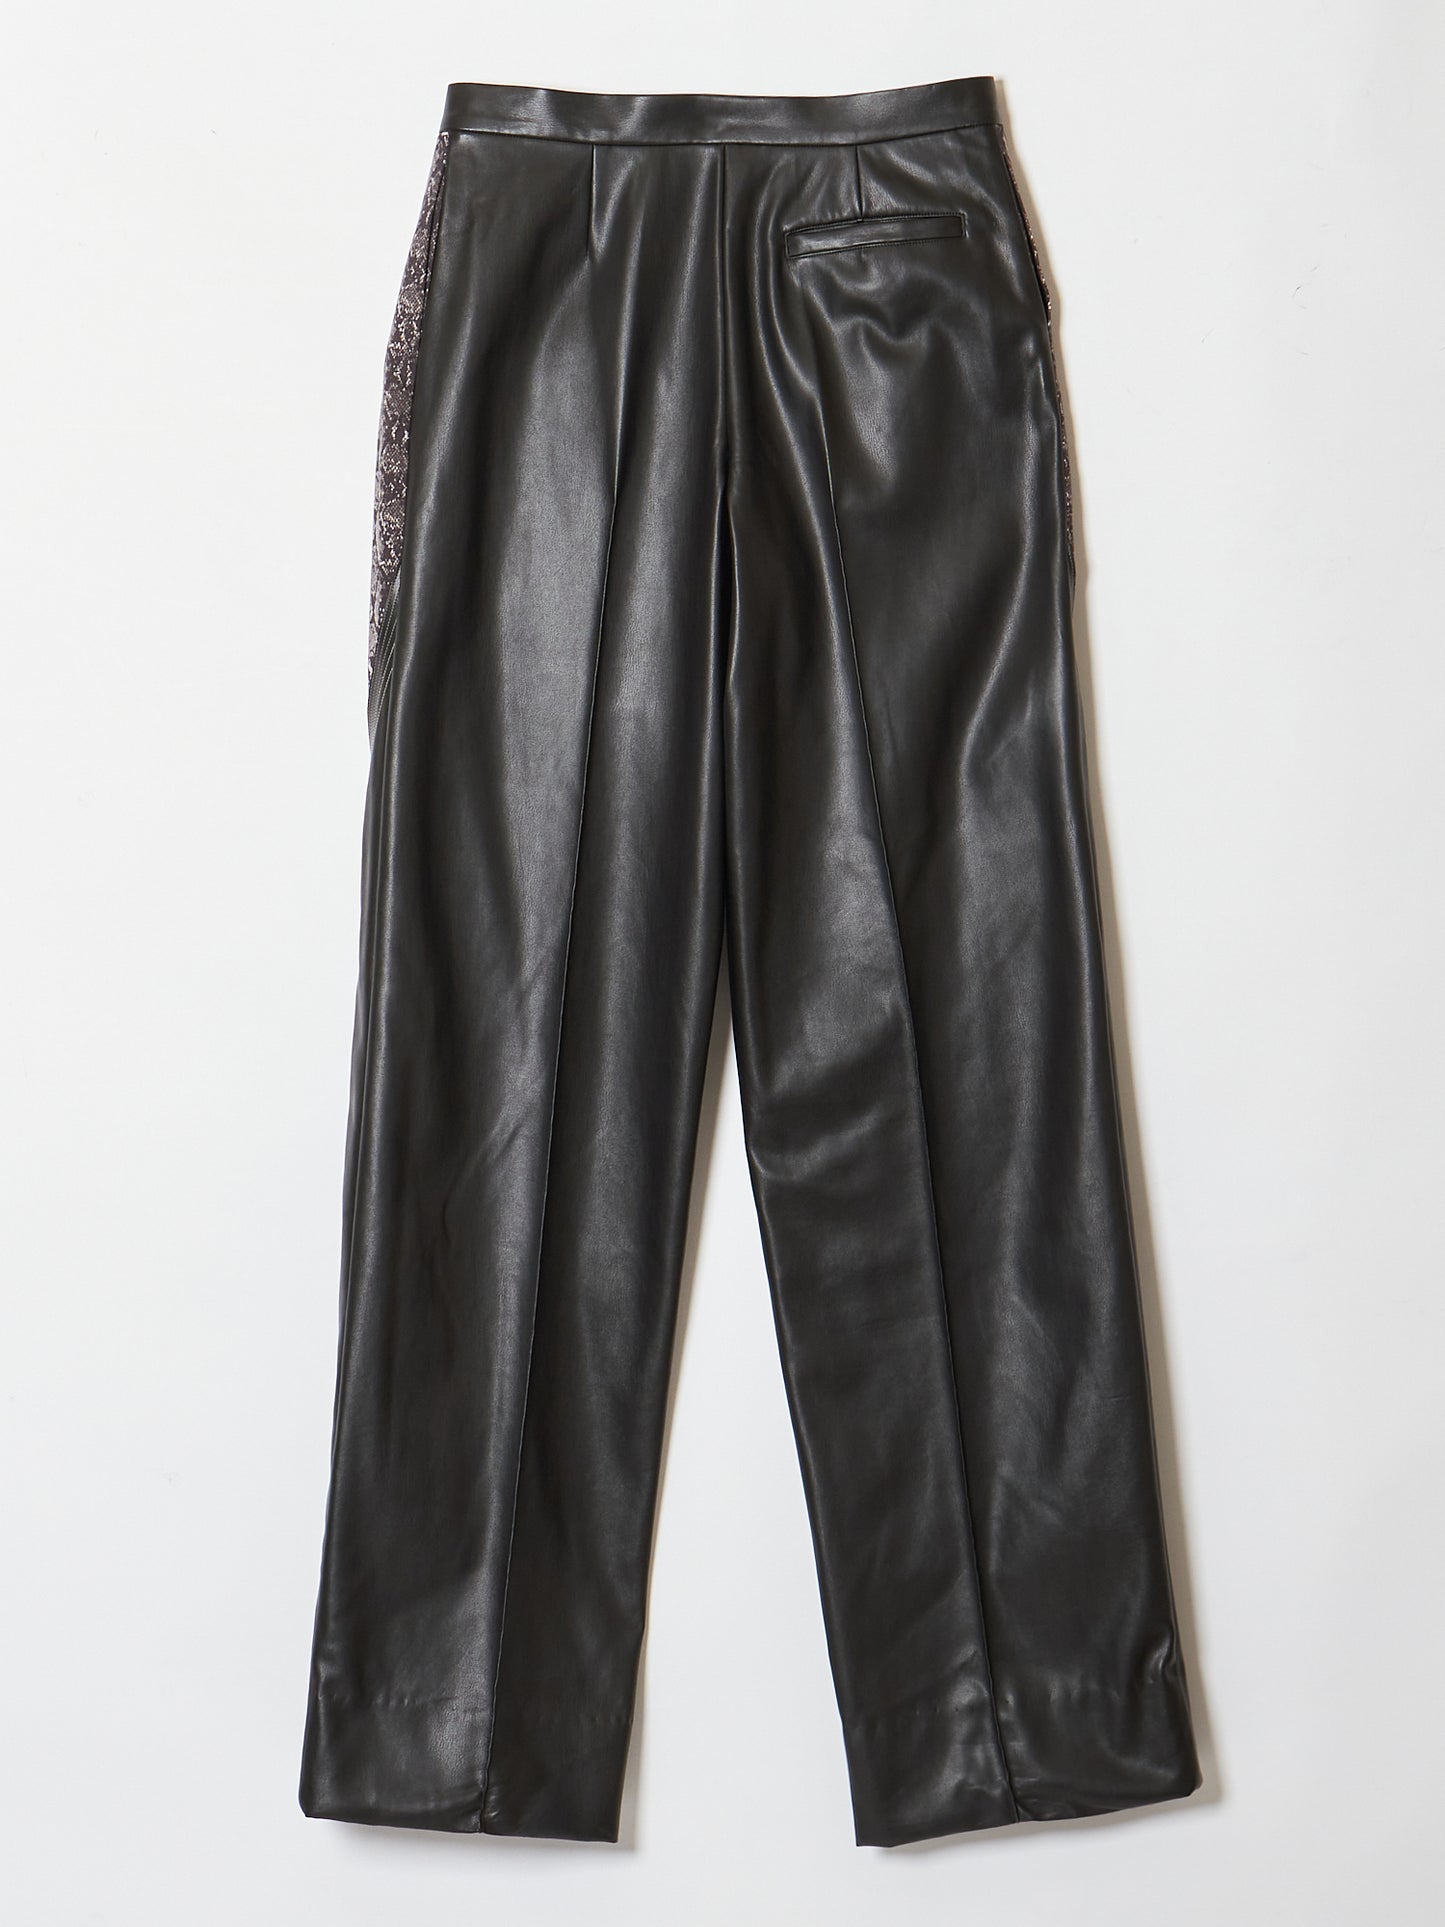 snake pattern faux leather pants【Delivery in January 2023】